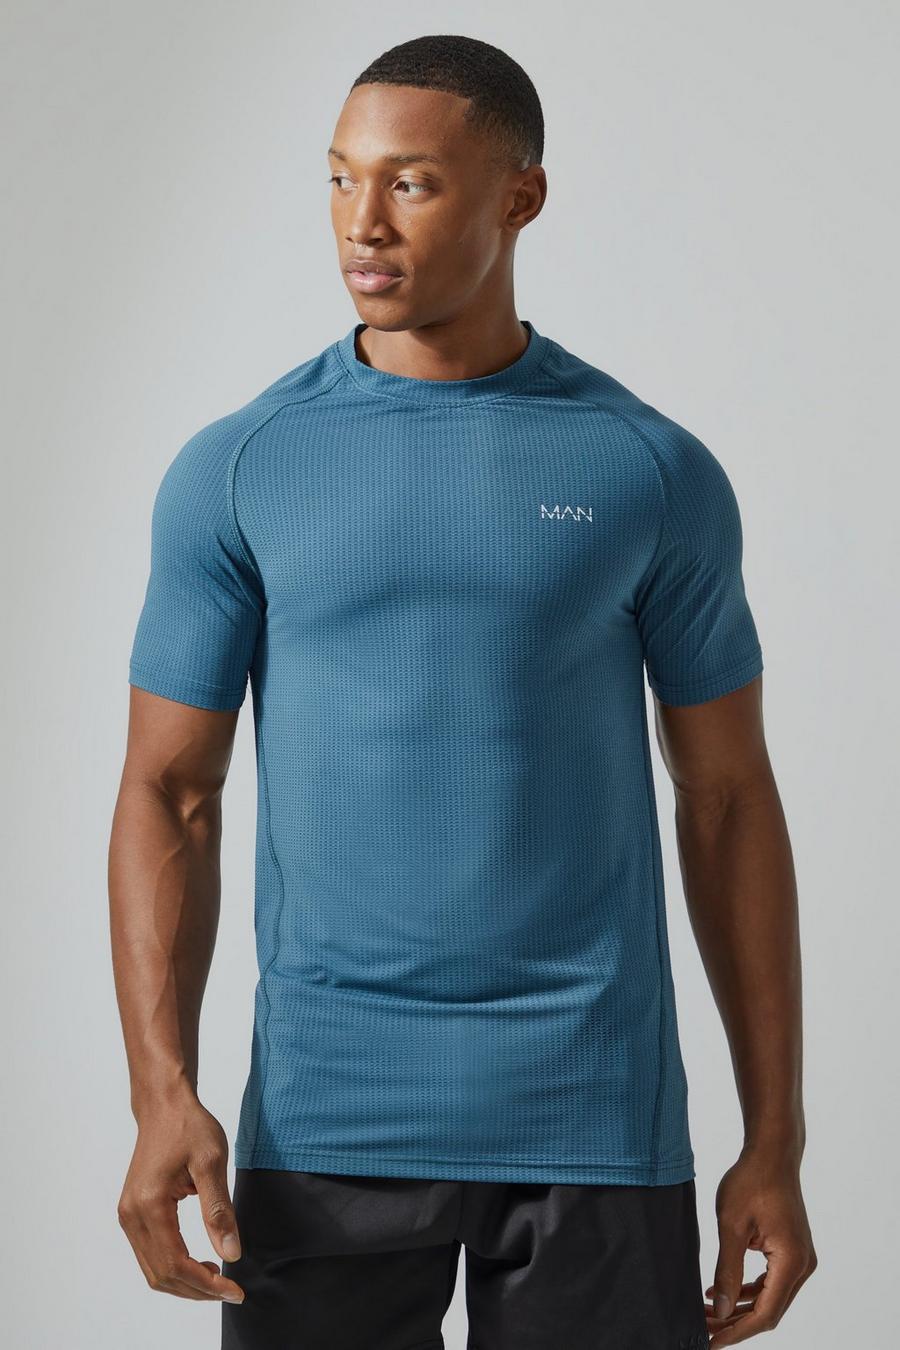 Man Active Muscle-Fit T-Shirt, Teal